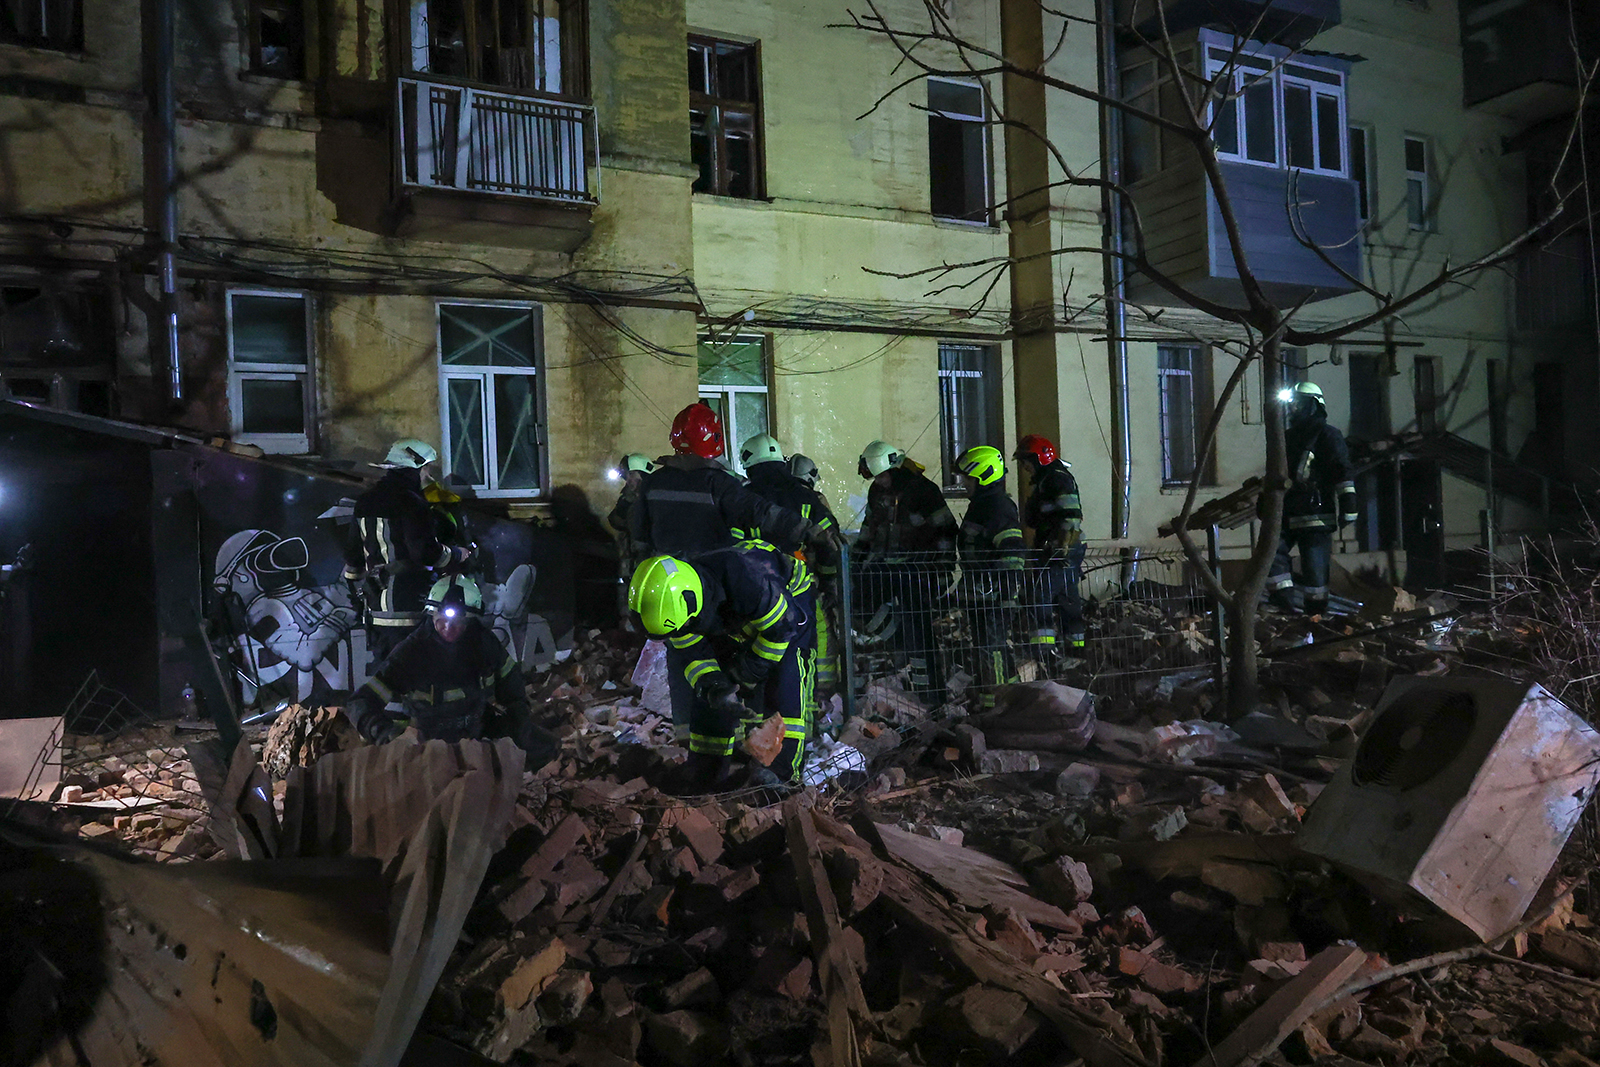 Ukrainian rescue workers disassemble the damaged structures of a building in the center of Kharkiv on Monday.